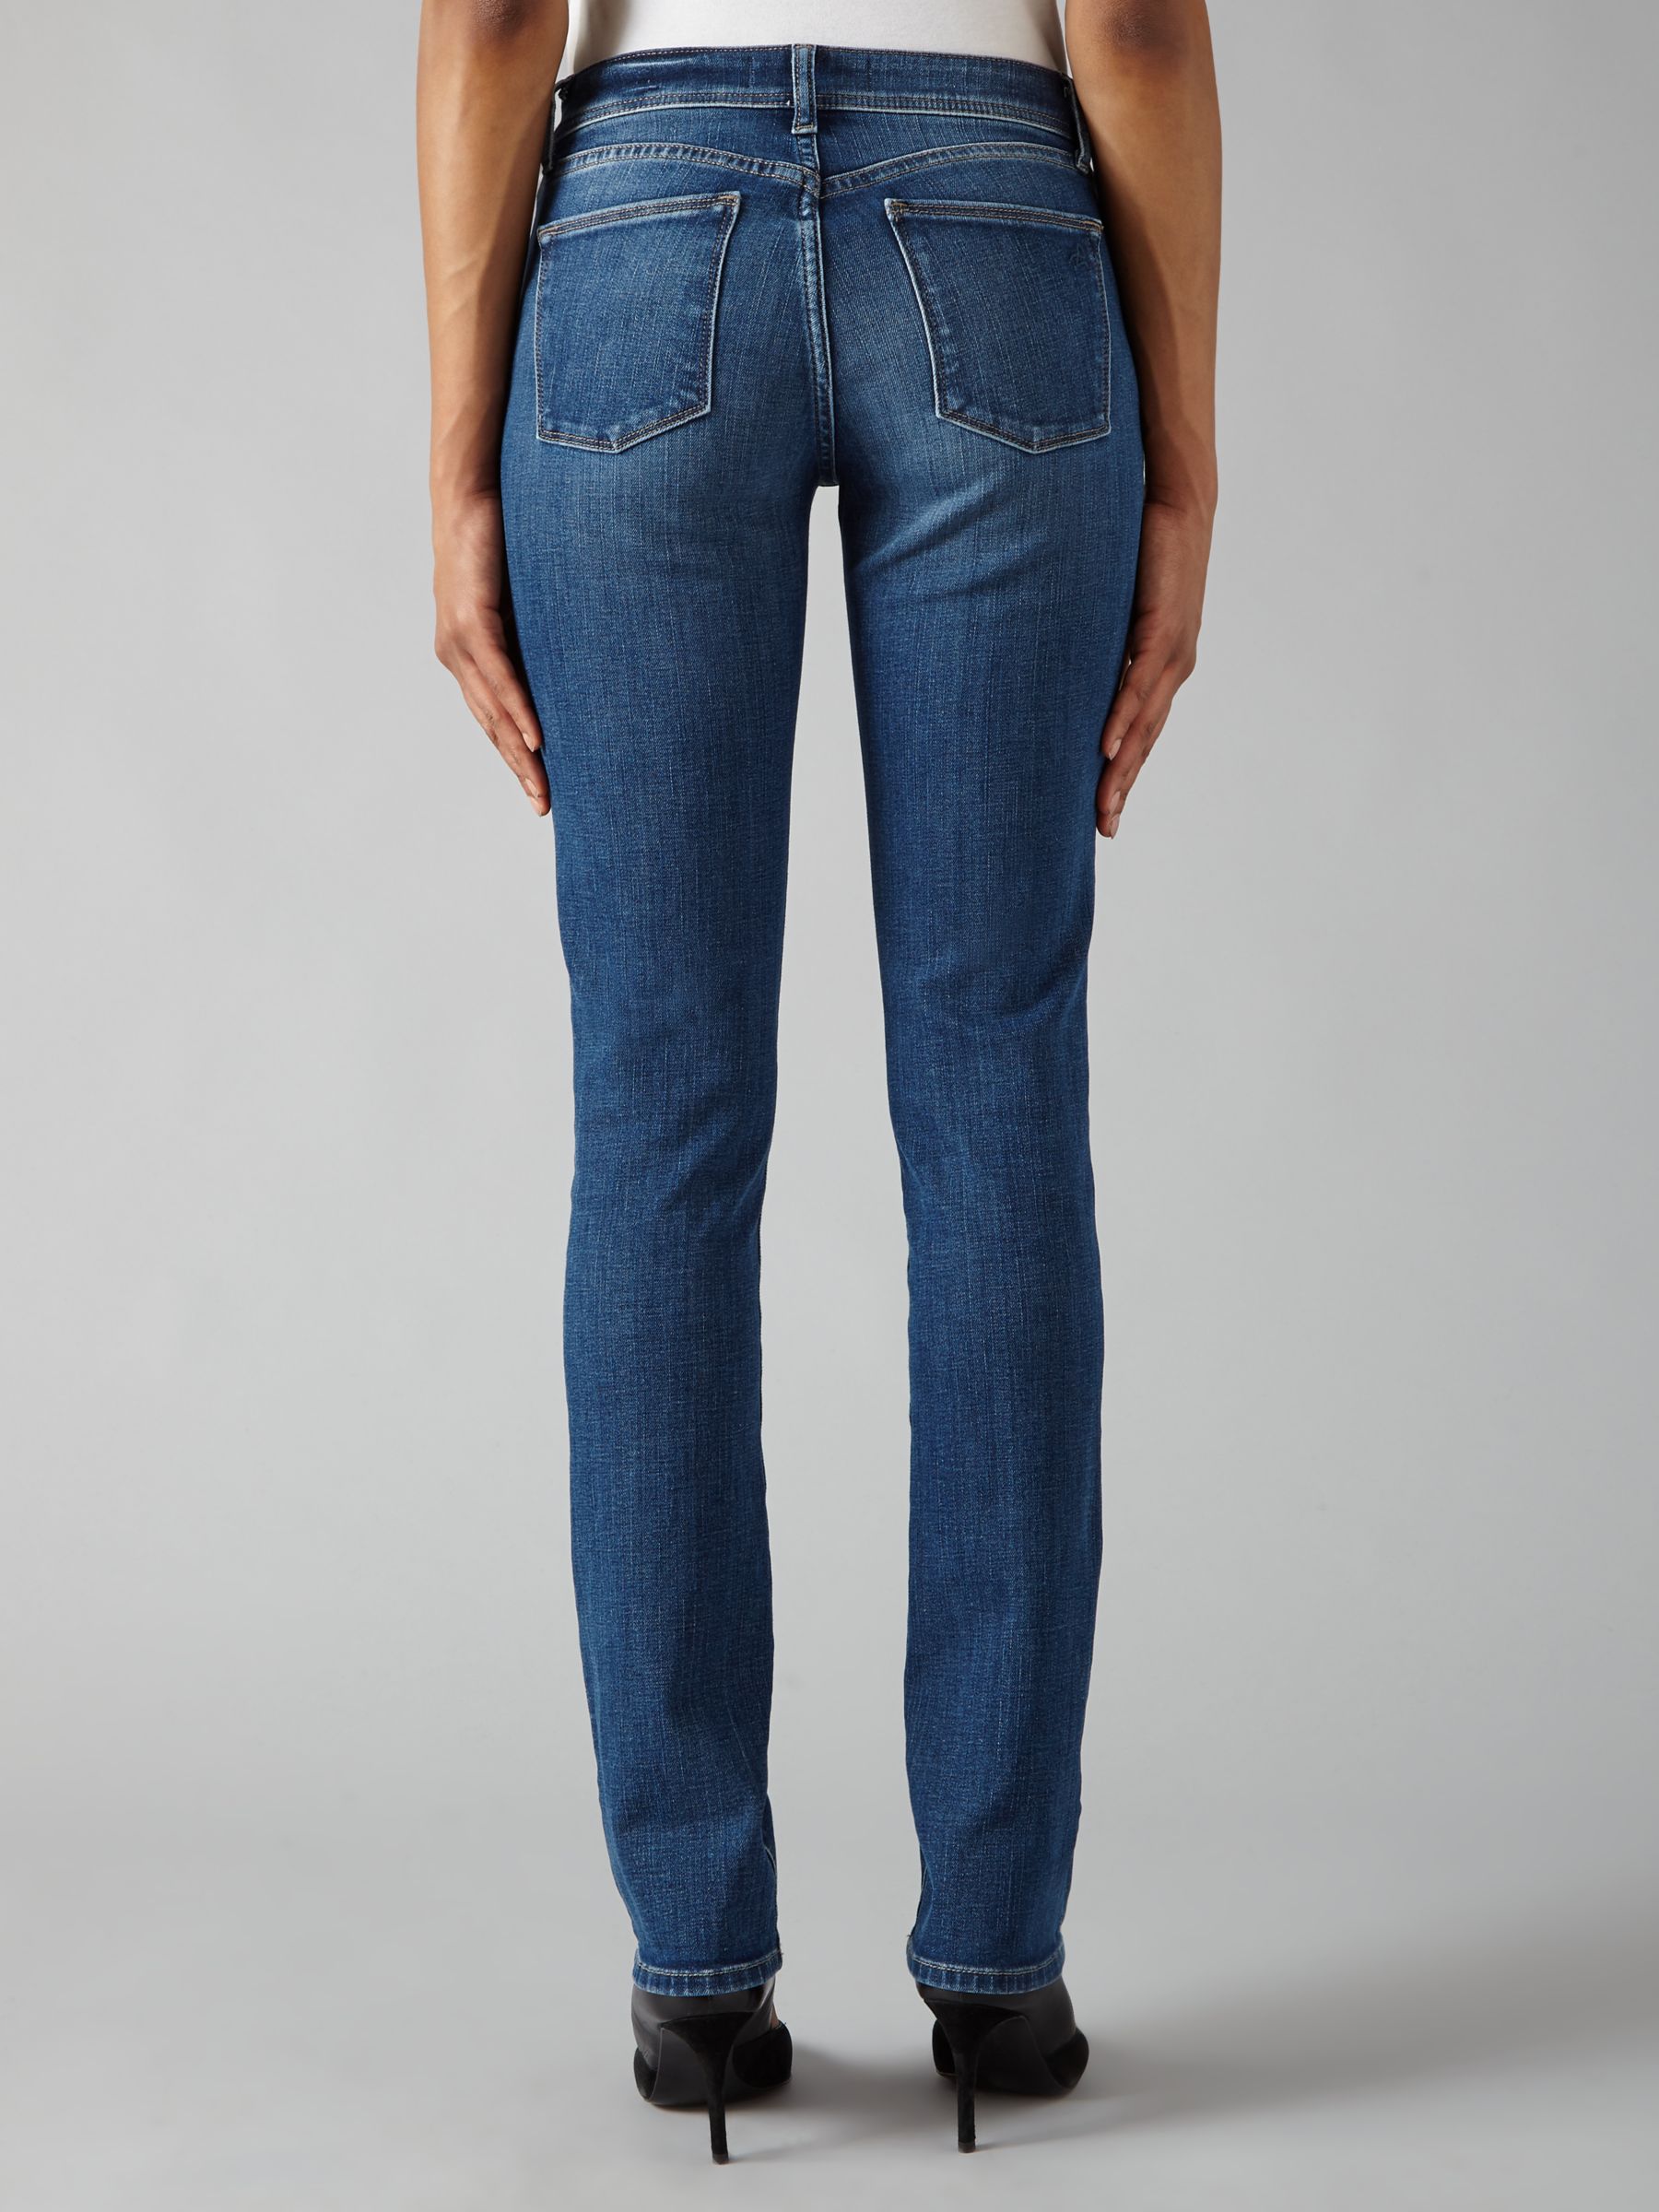 Buy DL1961 Coco Curvy Straight Jeans, Pacific Online at johnlewis.com